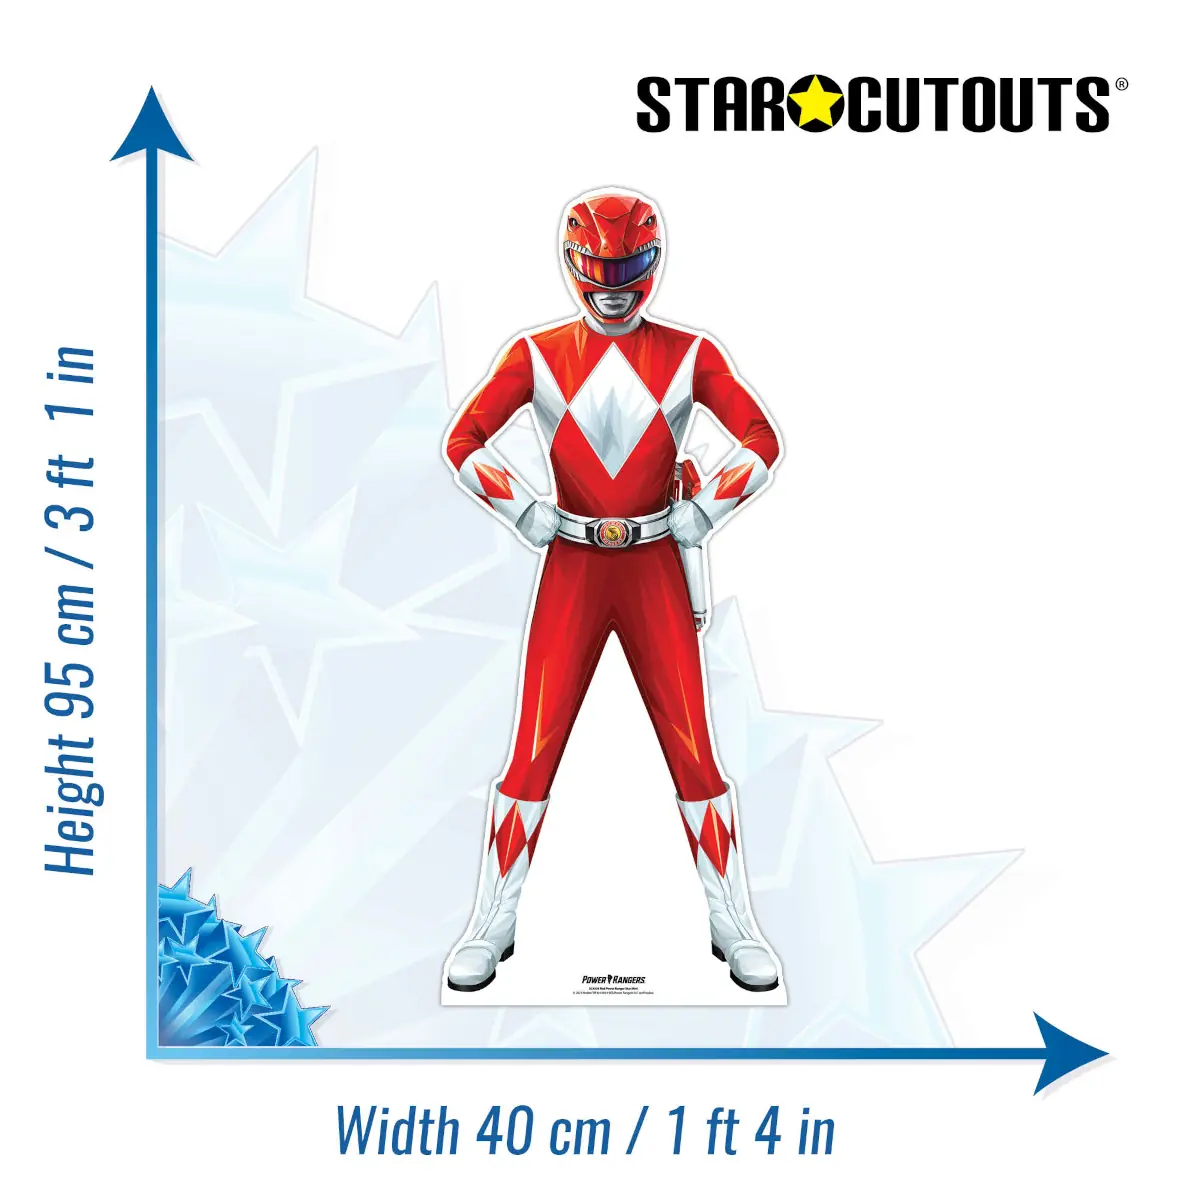 Red Power Ranger Official Mini Cardboard Cutout Standee Size